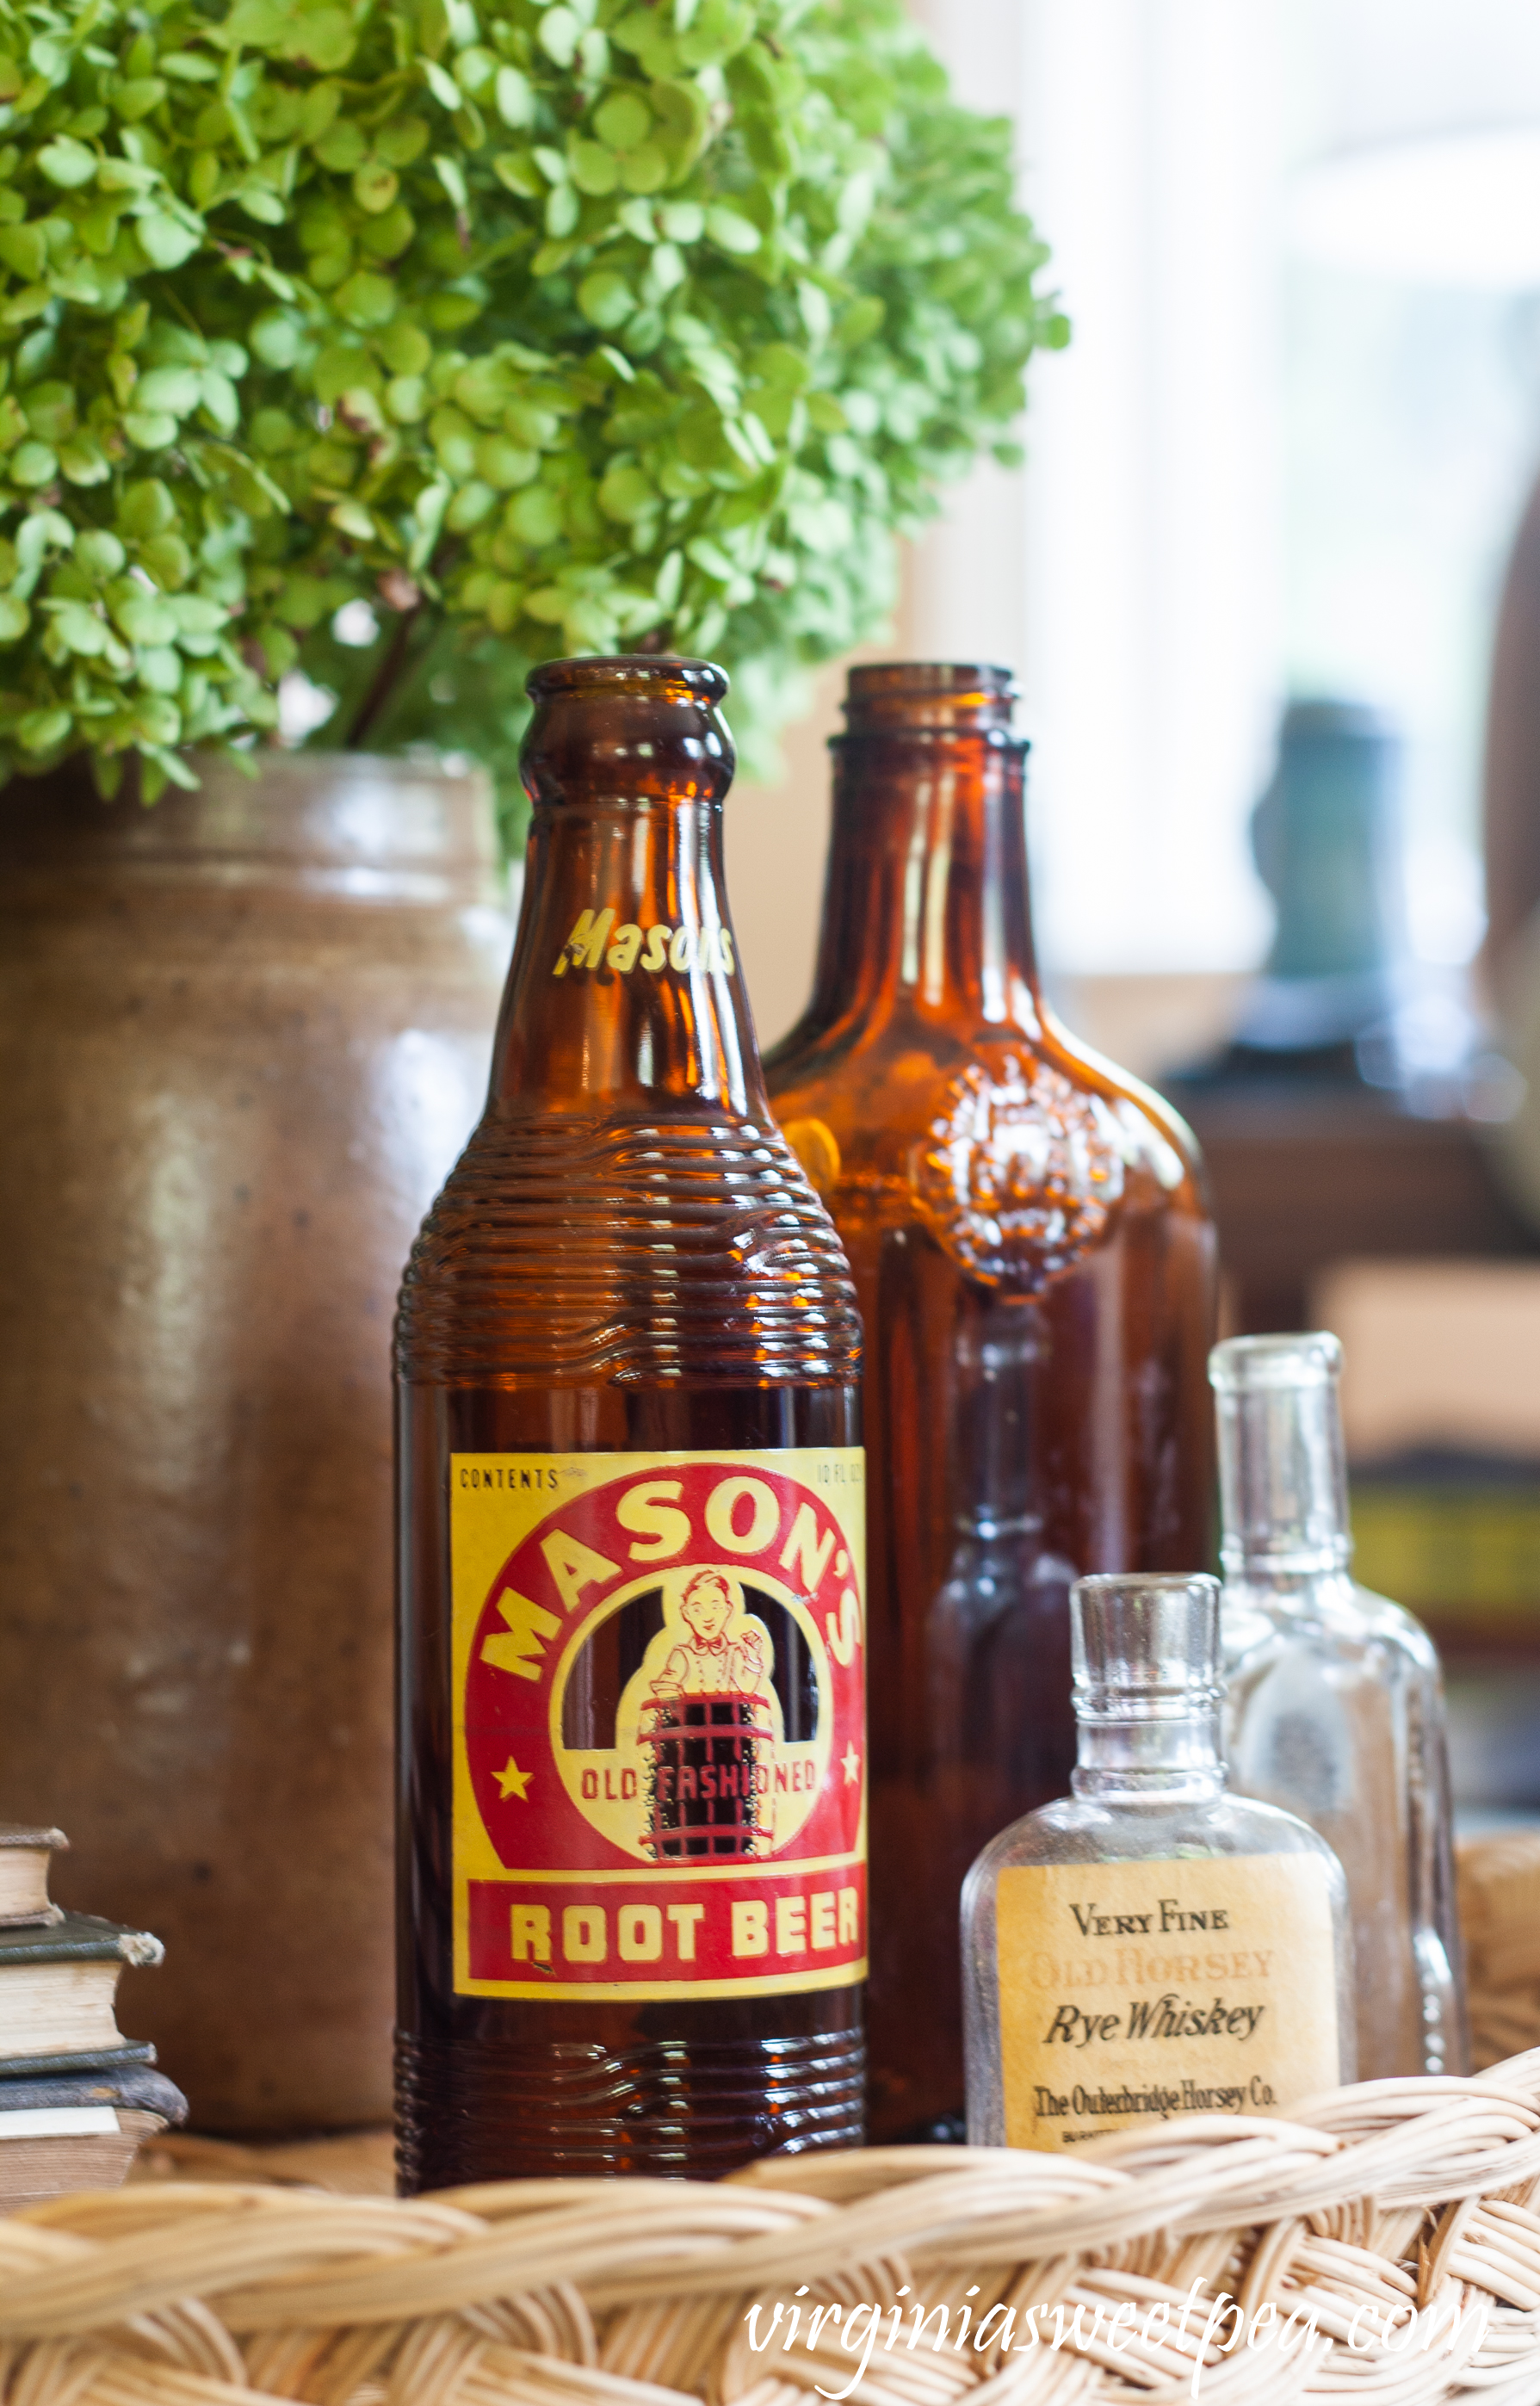 Mason's Root Beer bottle, Very Fine Old Horsey Rye Whiskey bottle, a brown liquor bottle and a small clear glass bottle.